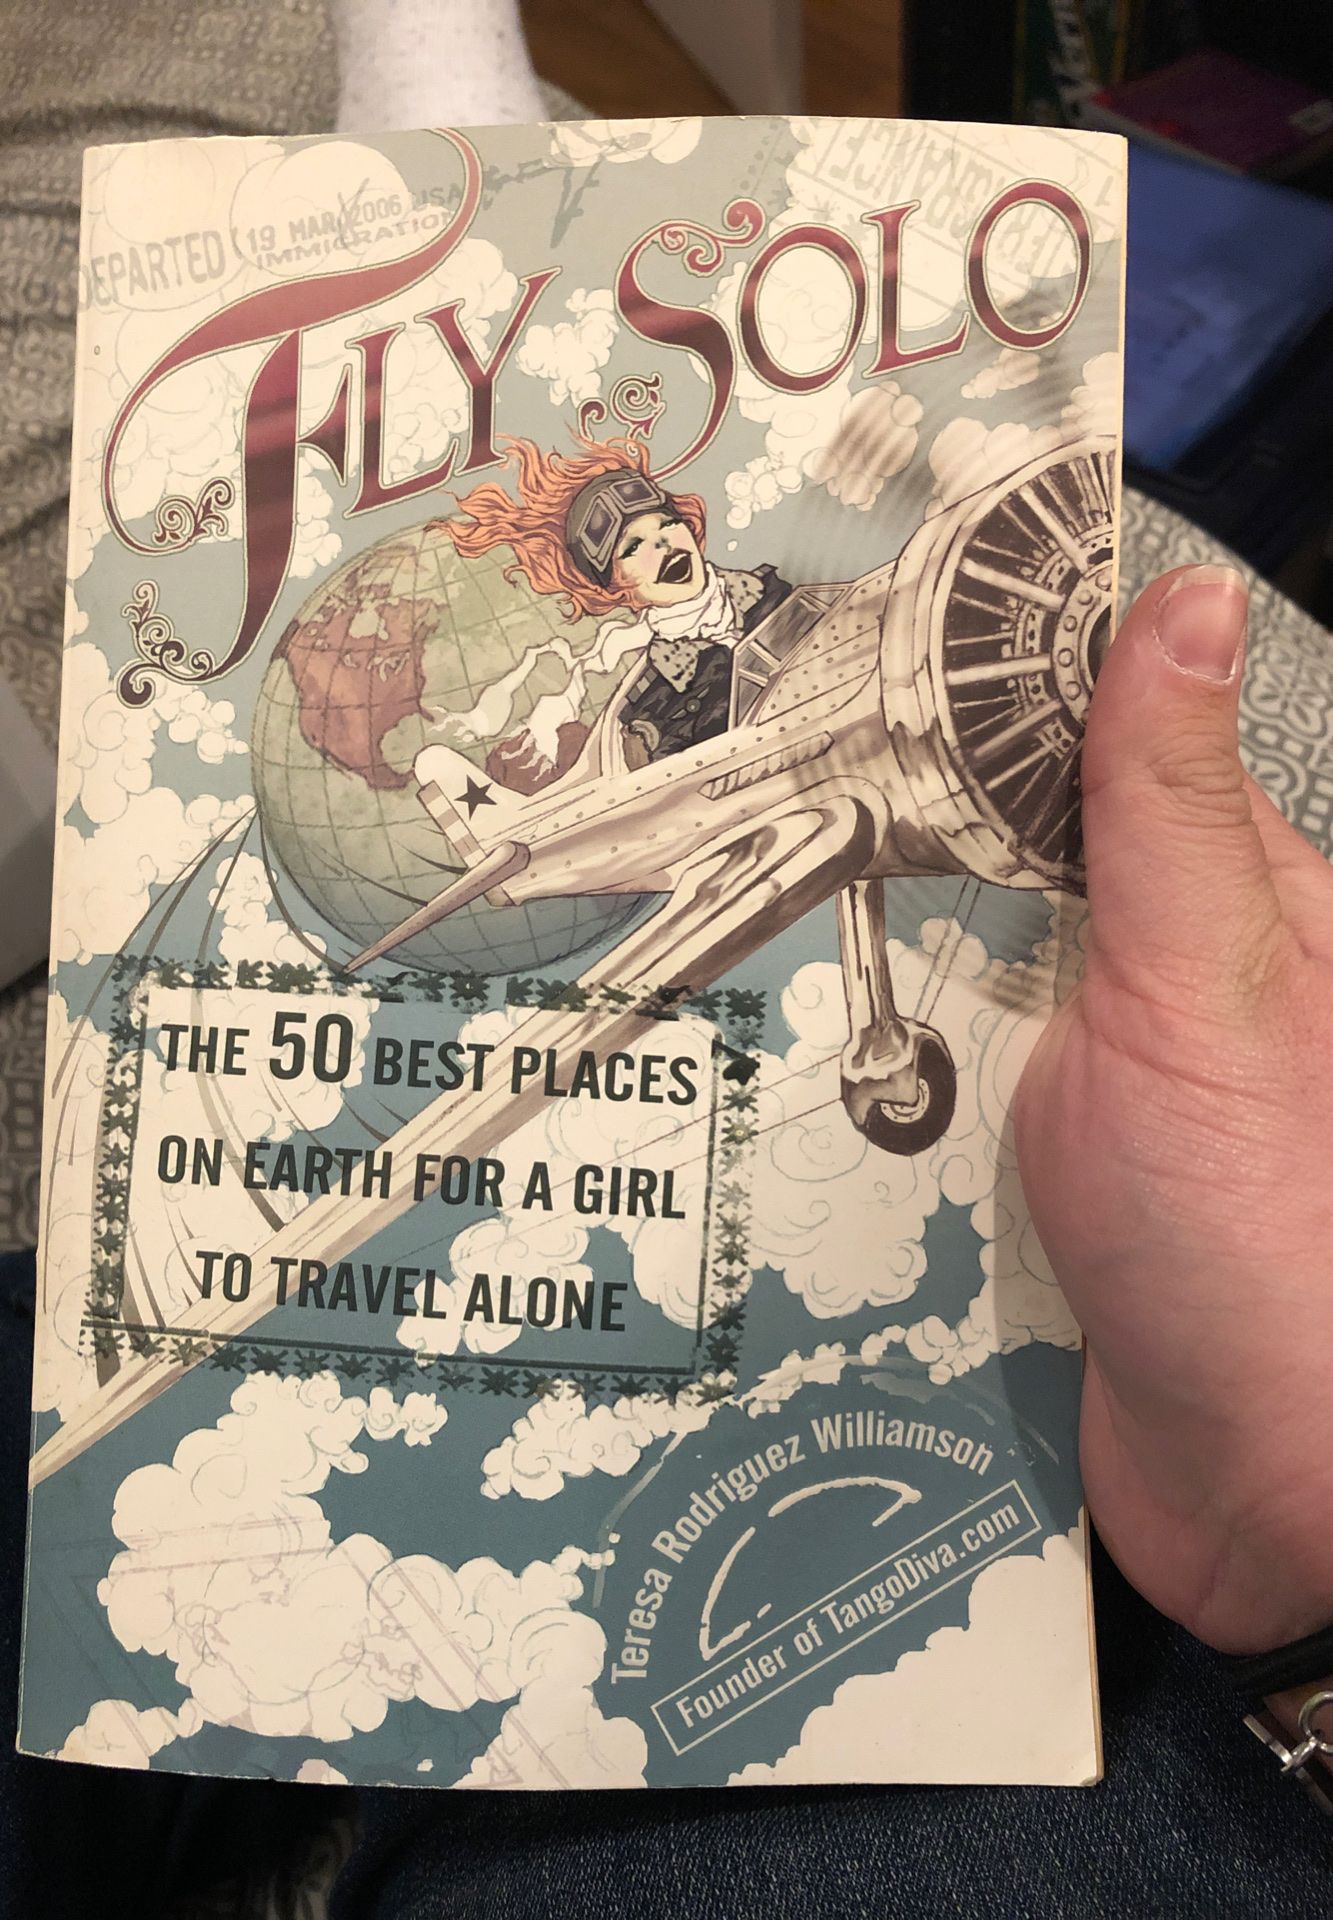 Fly solo book